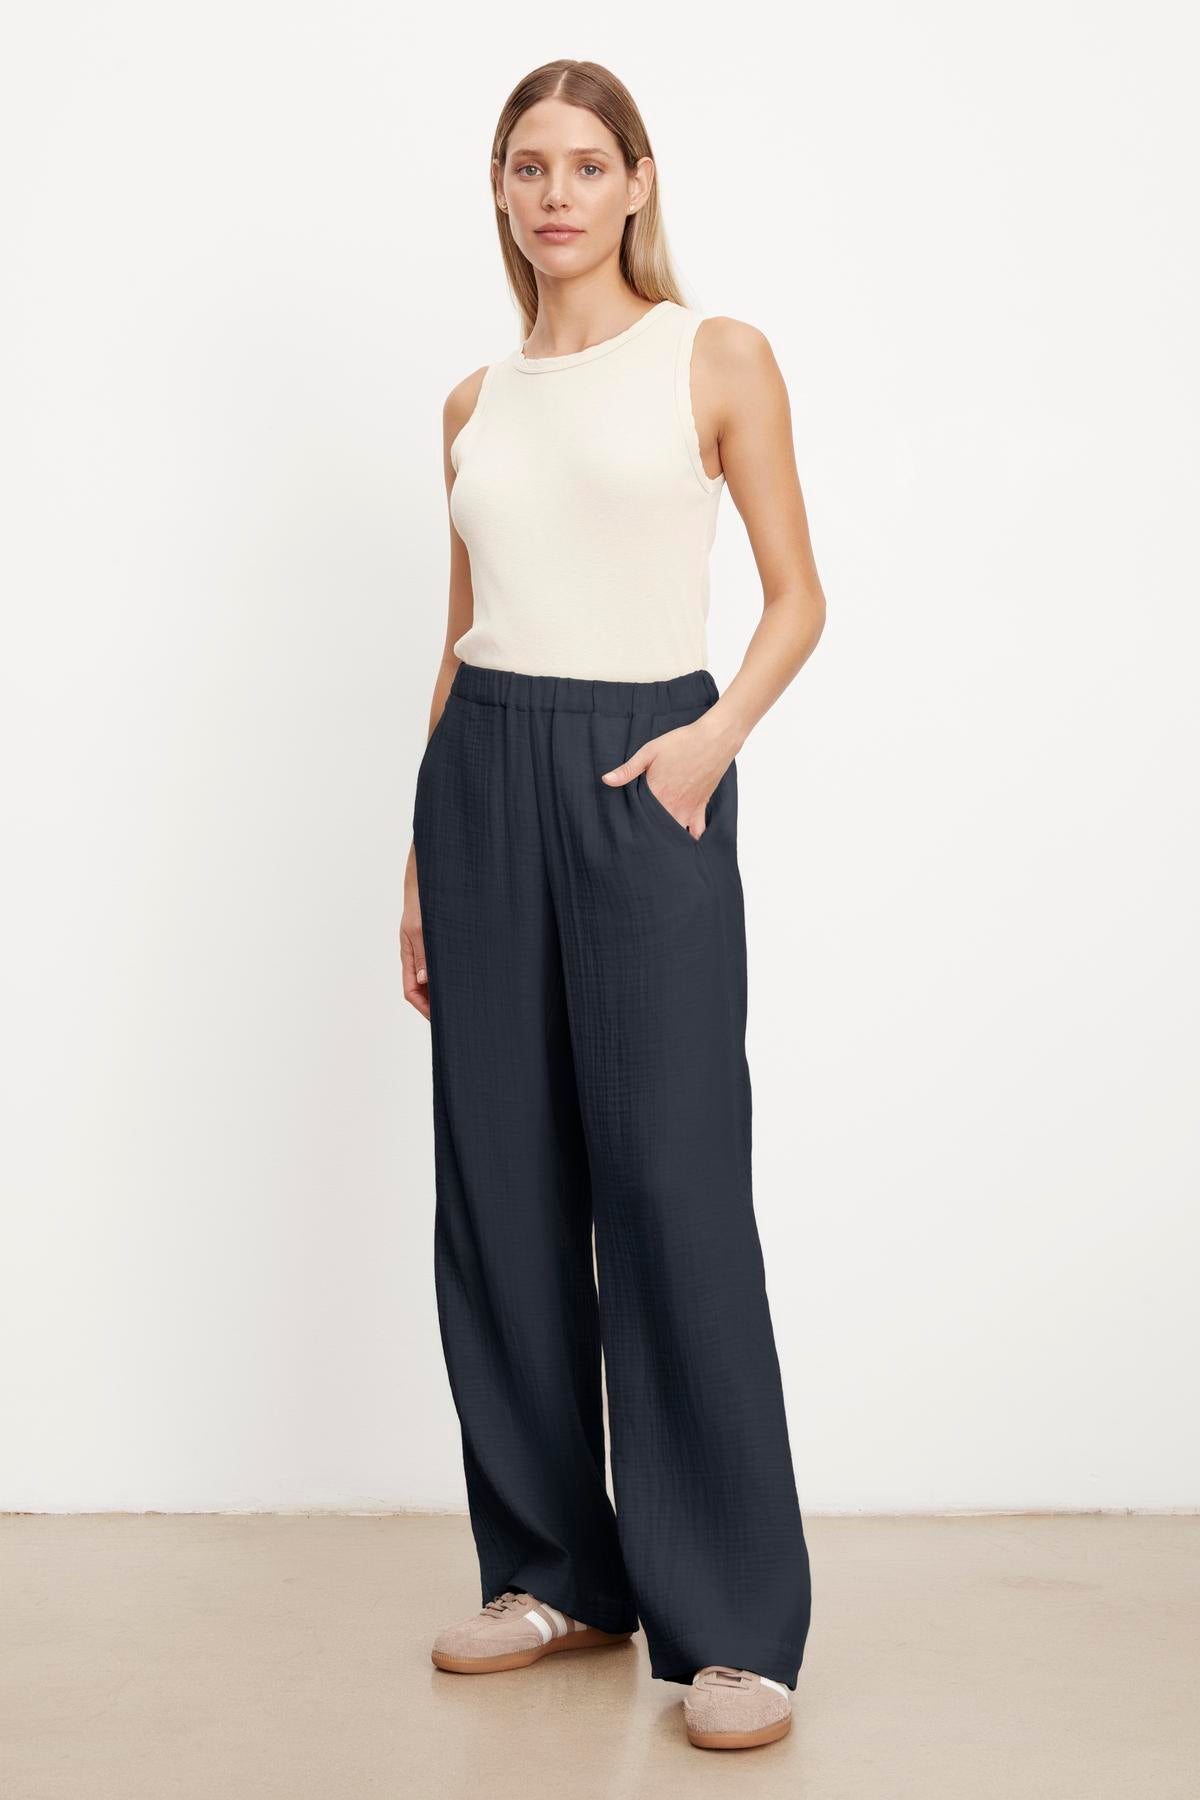   Woman in a sleeveless top and Velvet by Graham & Spencer JERRY COTTON GAUZE PANT posing against a plain background. 